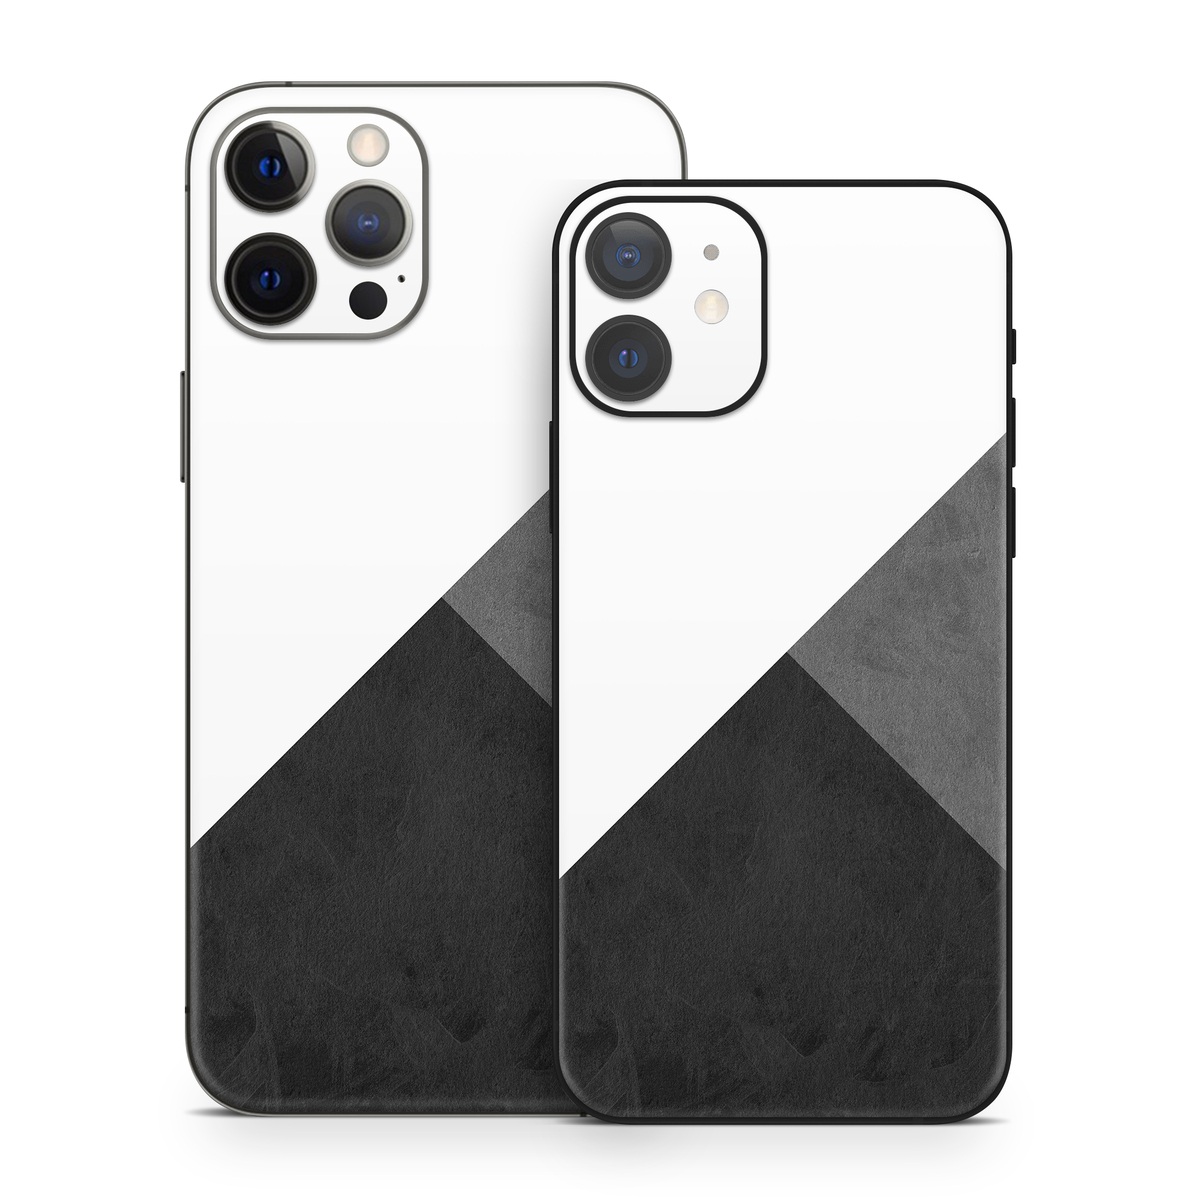 iPhone 12 Skin design of Black, White, Black-and-white, Line, Grey, Architecture, Monochrome, Triangle, Monochrome photography, Pattern with white, black, gray colors